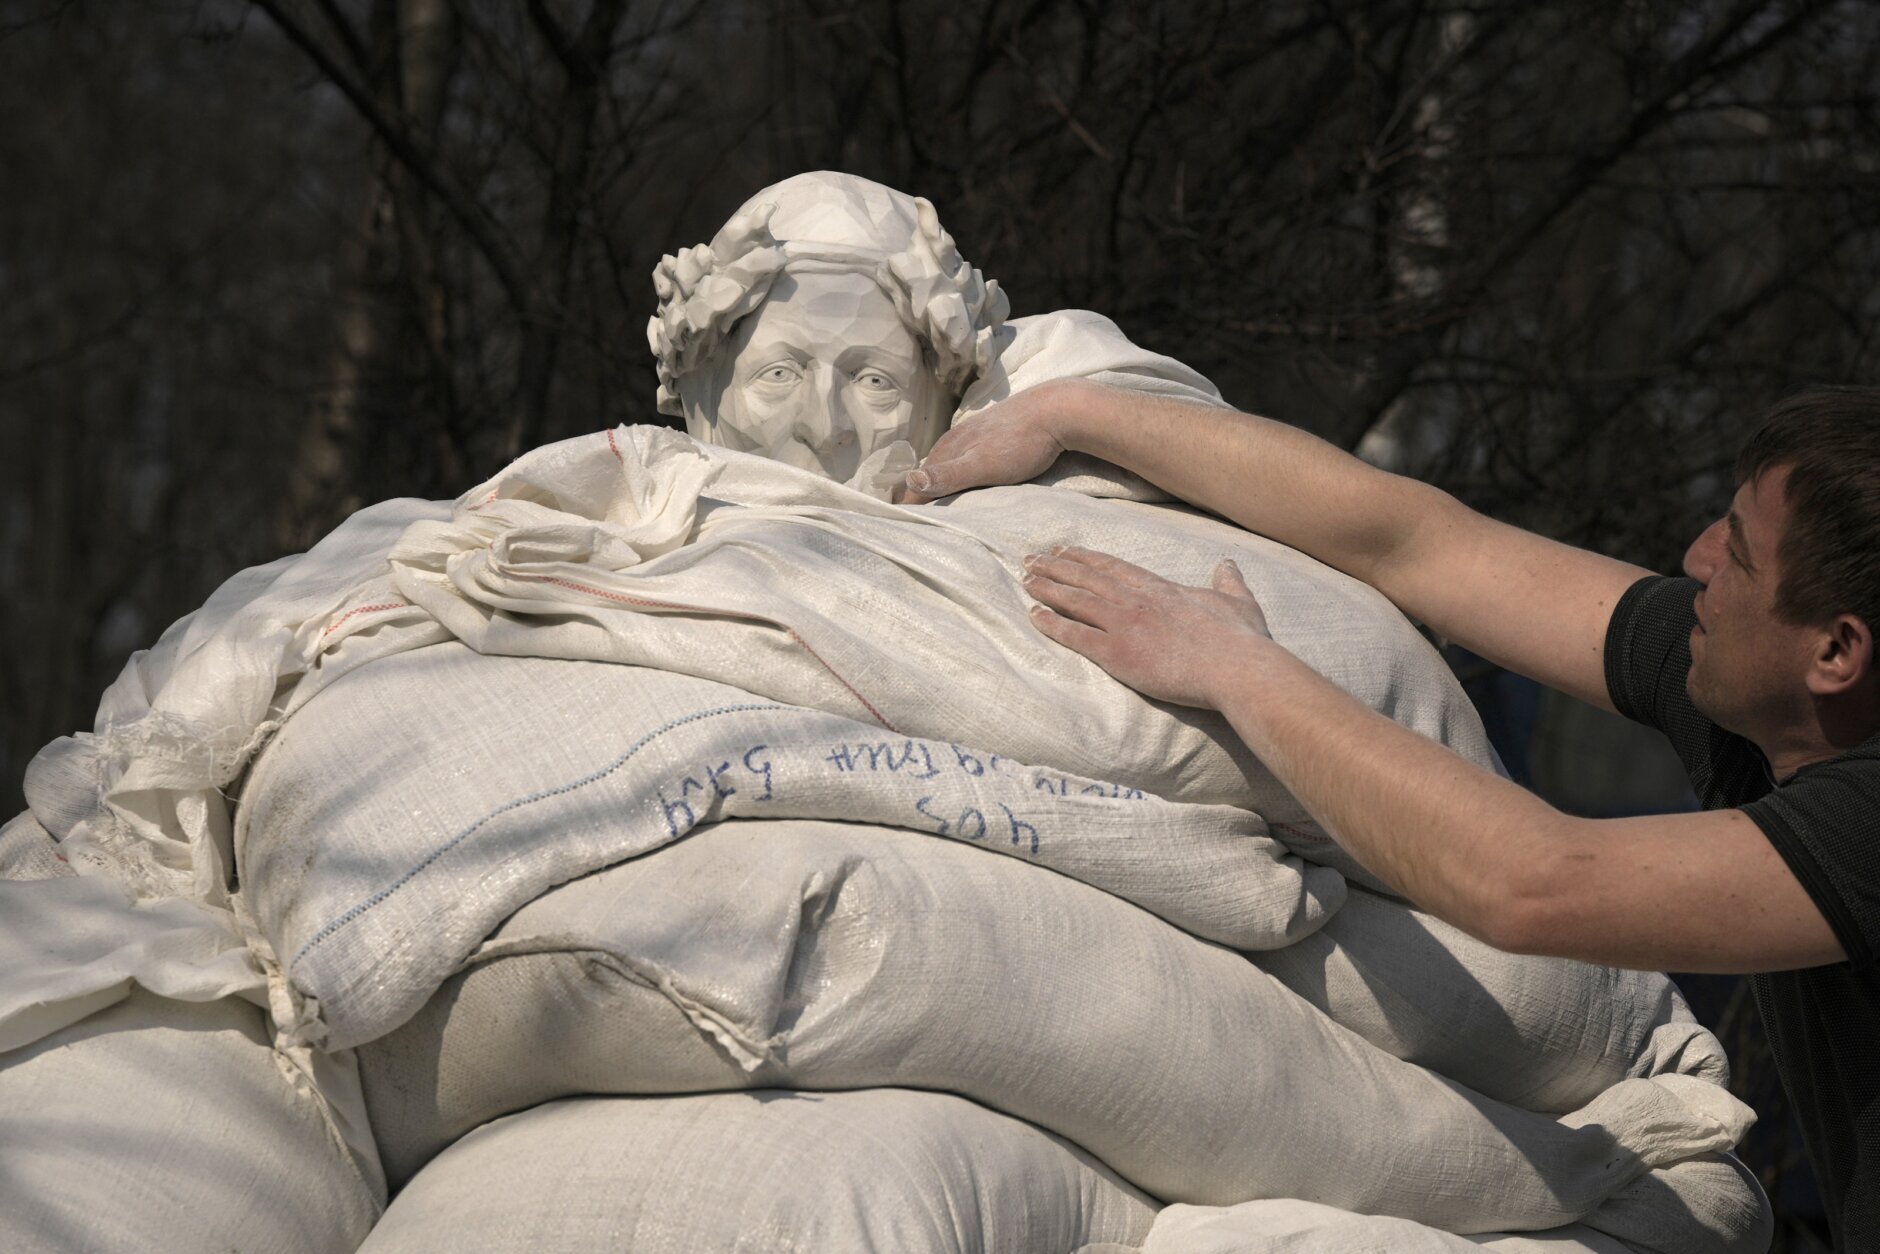 Municipal workers finish covering a statue of Italian poet and philosopher Dante Alighieri with sandbags to protect it from potential damage from shelling, in Kyiv, Ukraine, Wednesday, March 23, 2022. The statue, by sculptor Luciano Massari, was inaugurated in 2015 to mark 750 years since Dante's birth. (AP Photo/Vadim Ghirda)